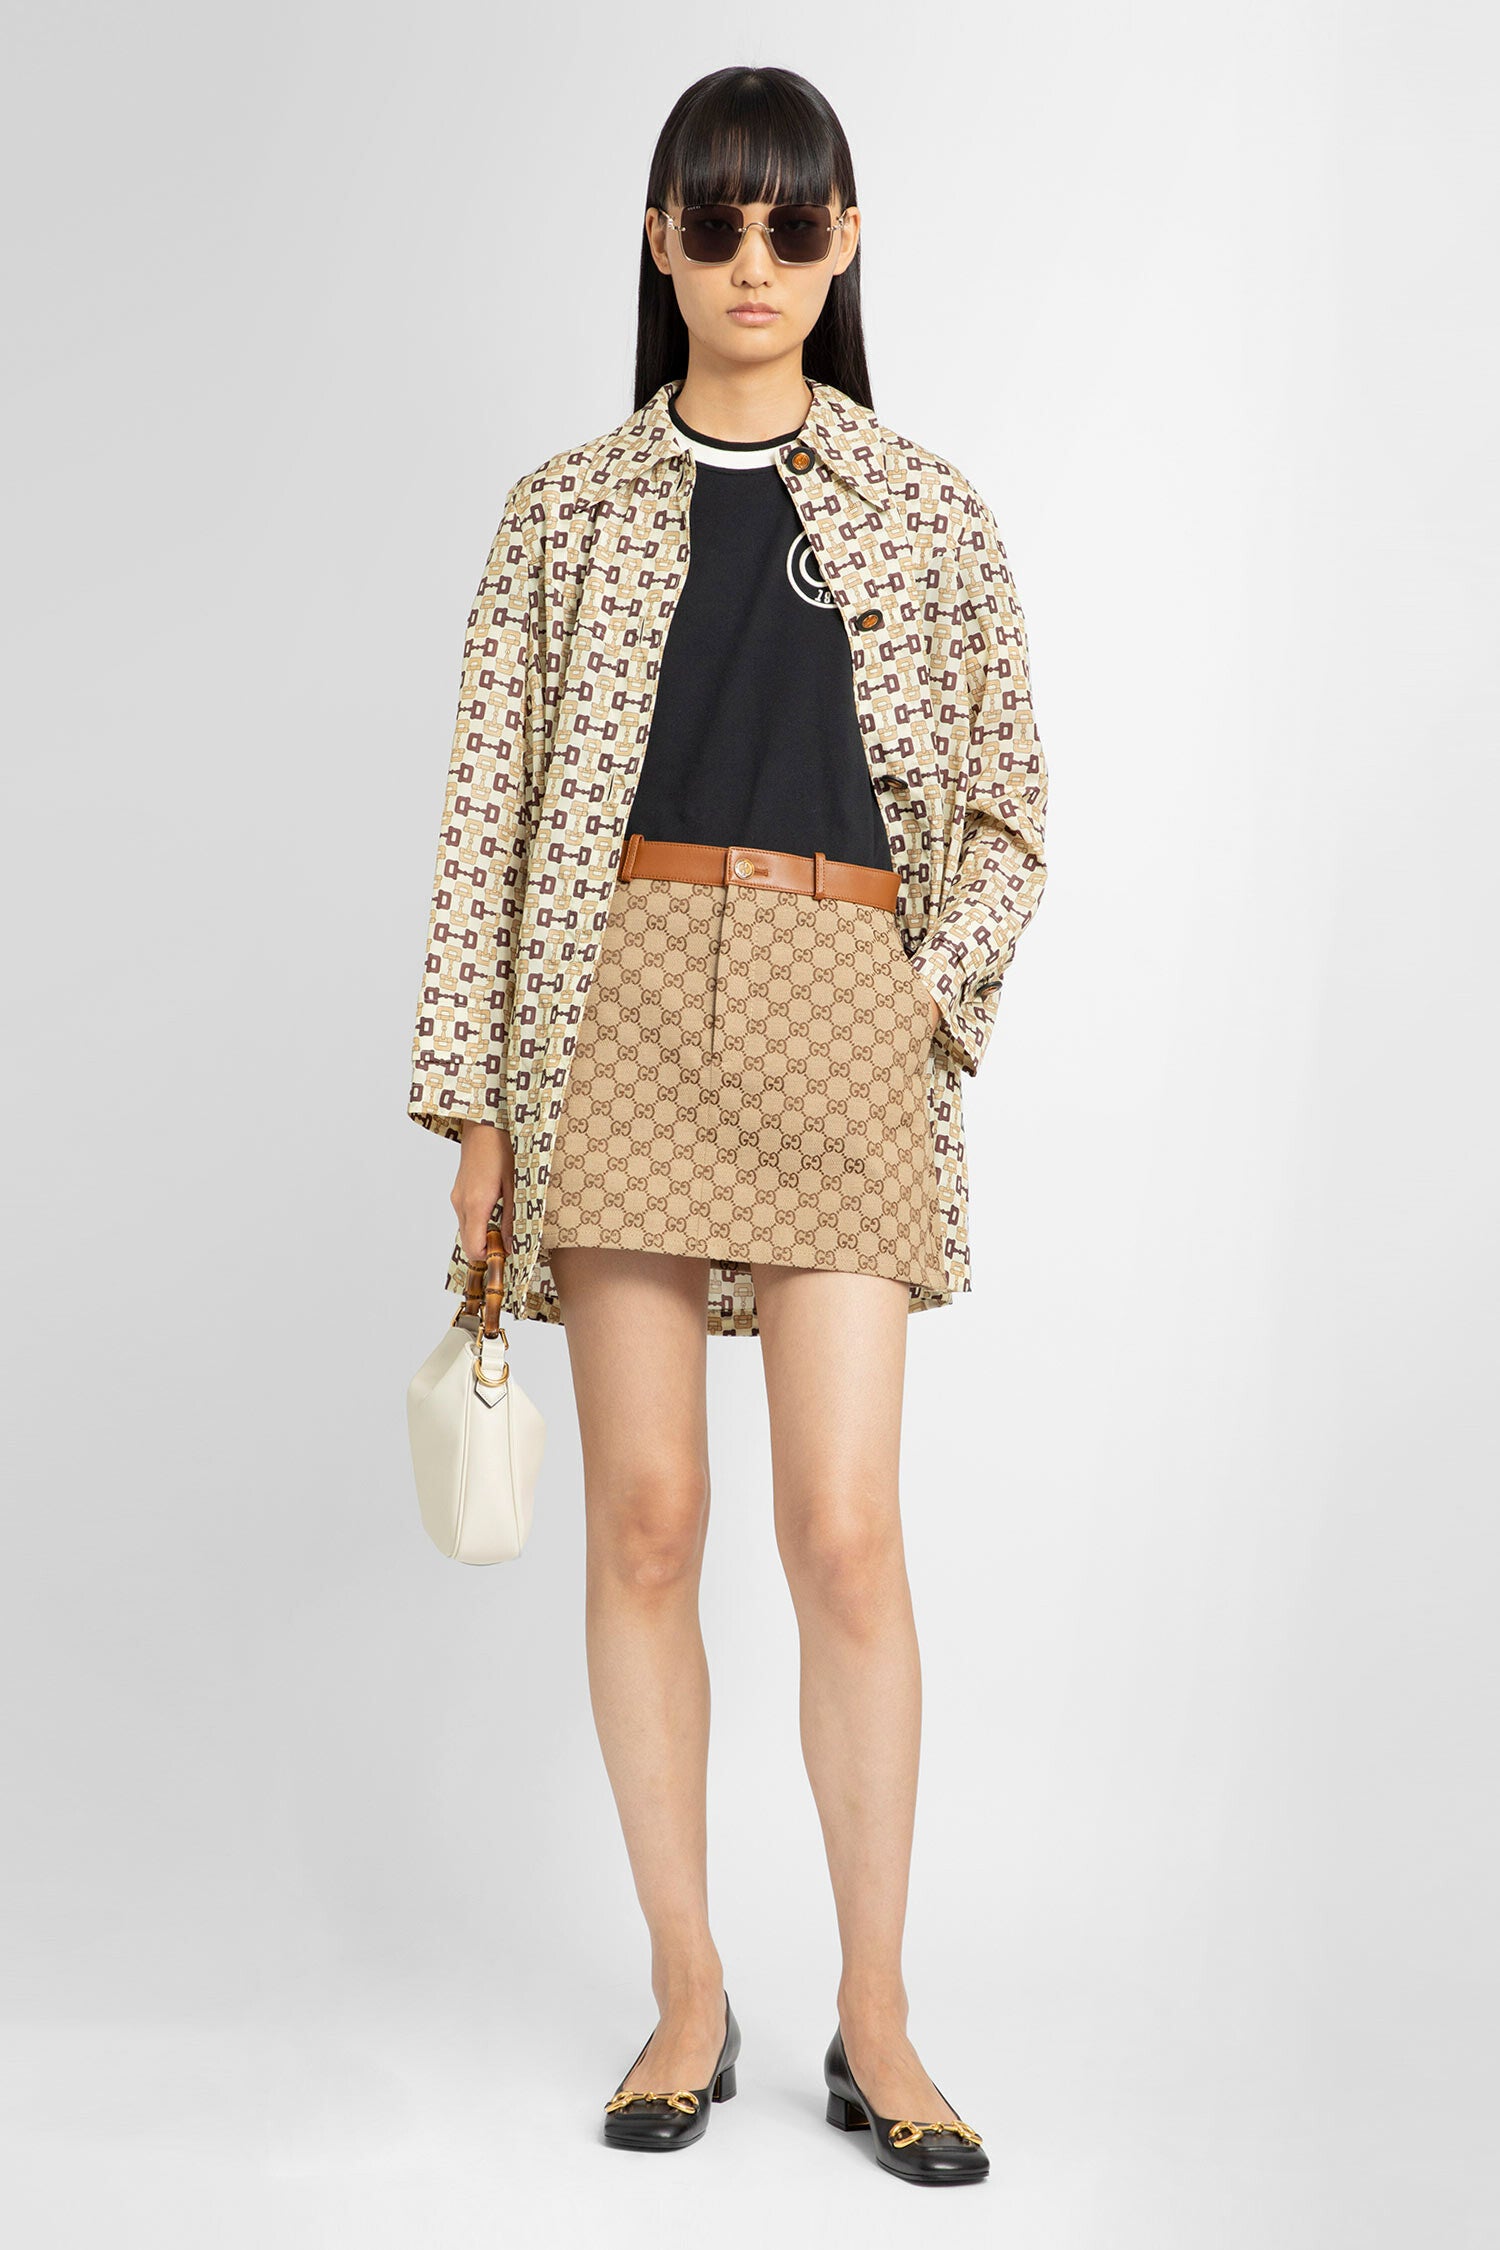 Products By Louis Vuitton: Monogram Printed Leather Mini Skirt